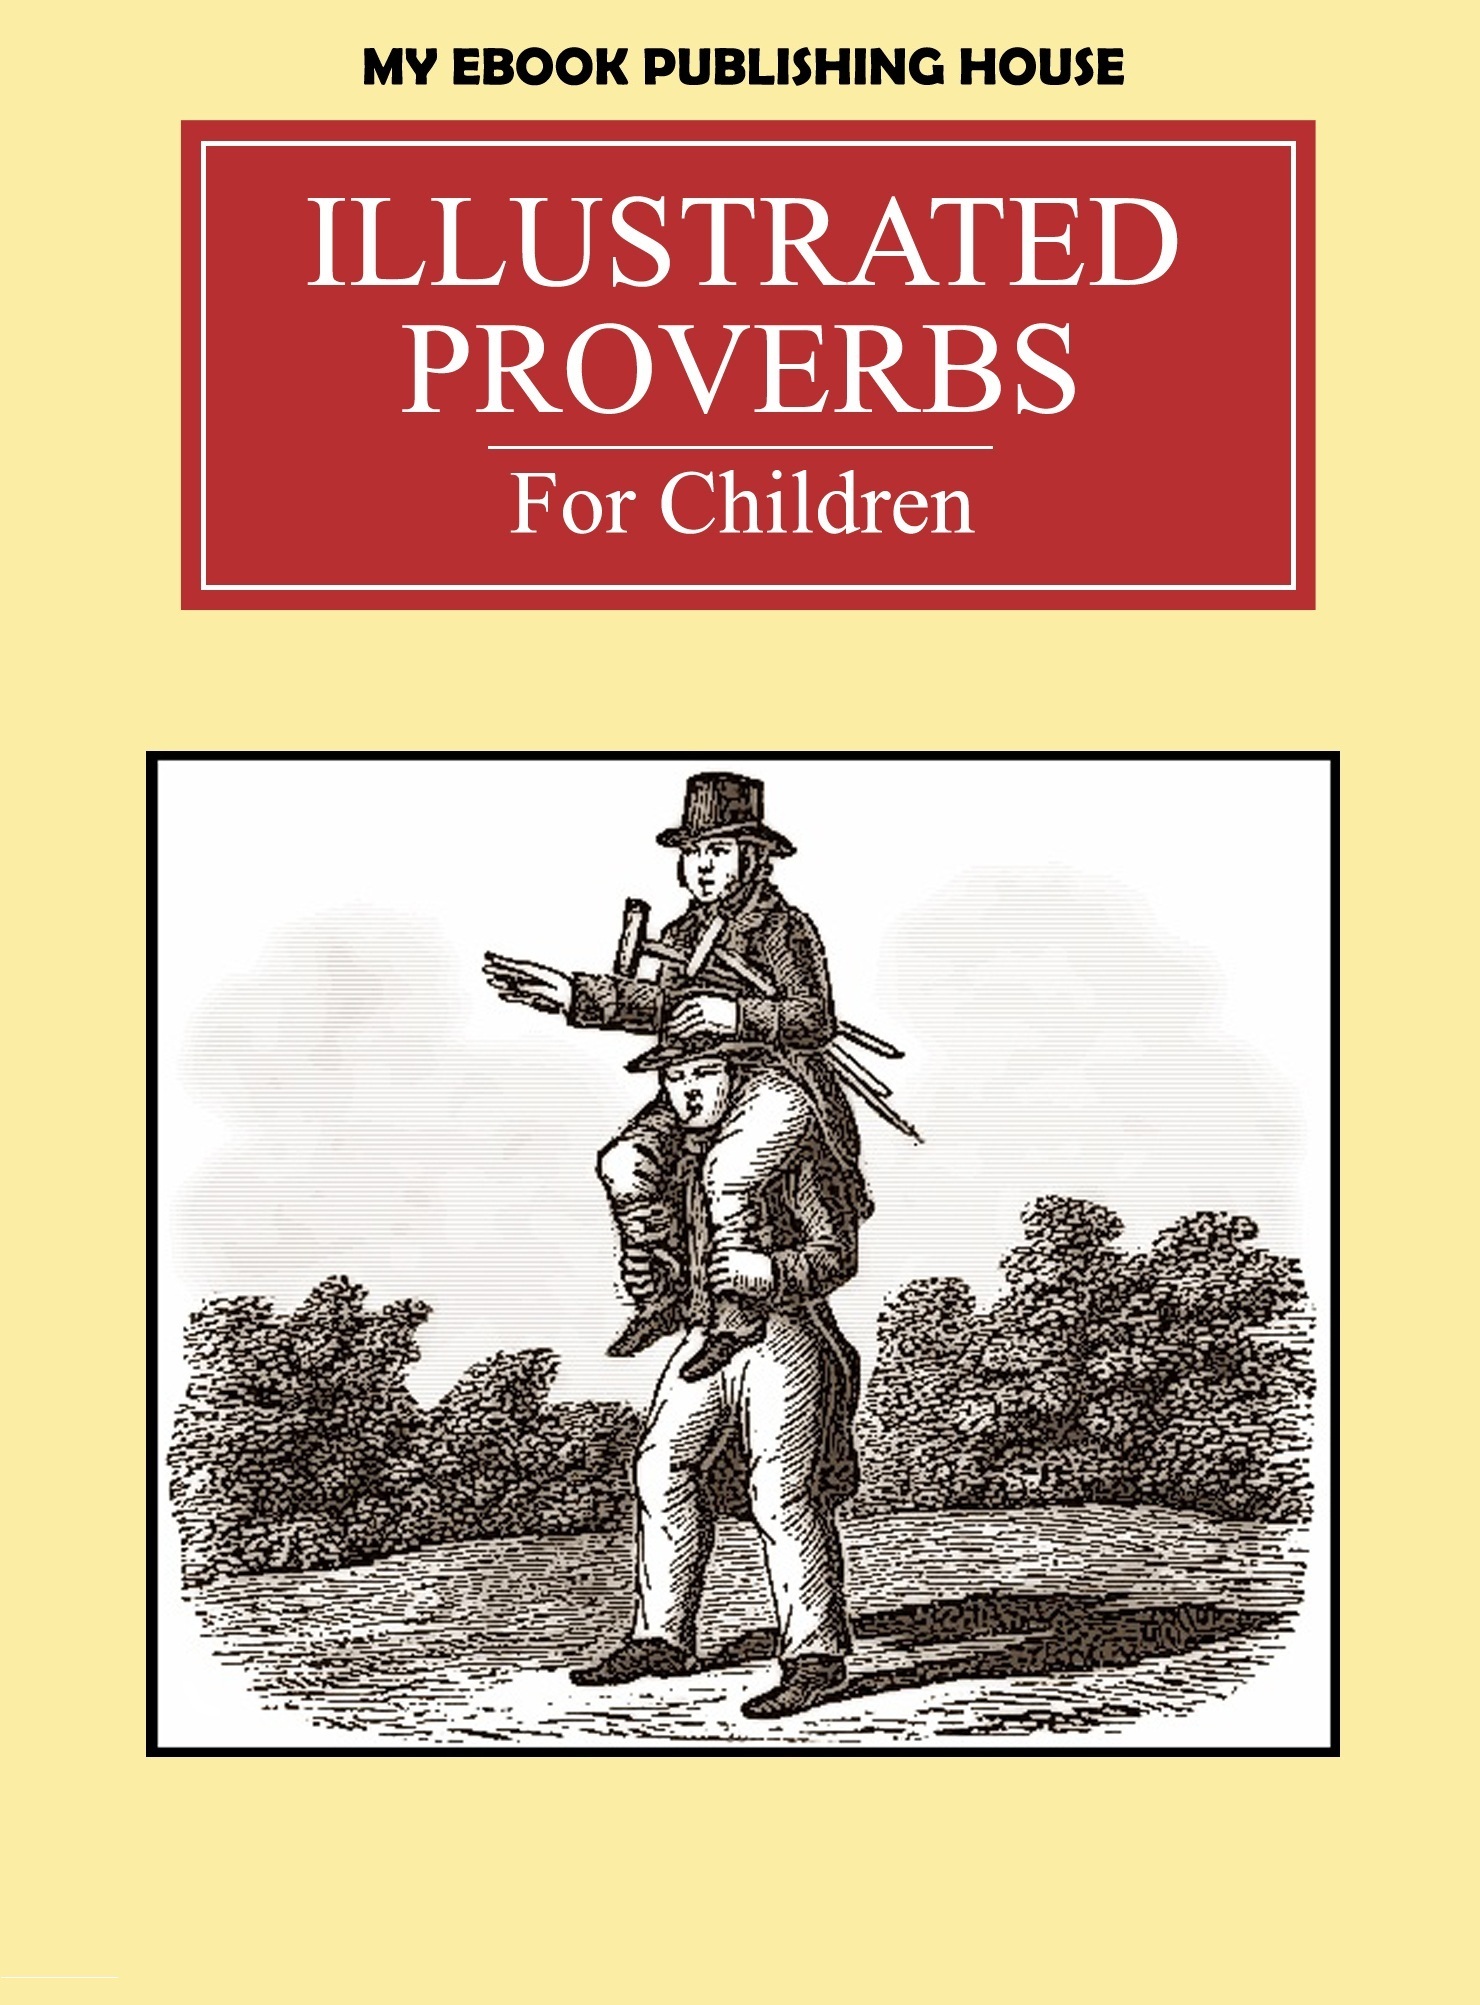 My e books. Proverbs for children. Proverbs illustrations. Publishing House. The book of Proverbs illustrated.